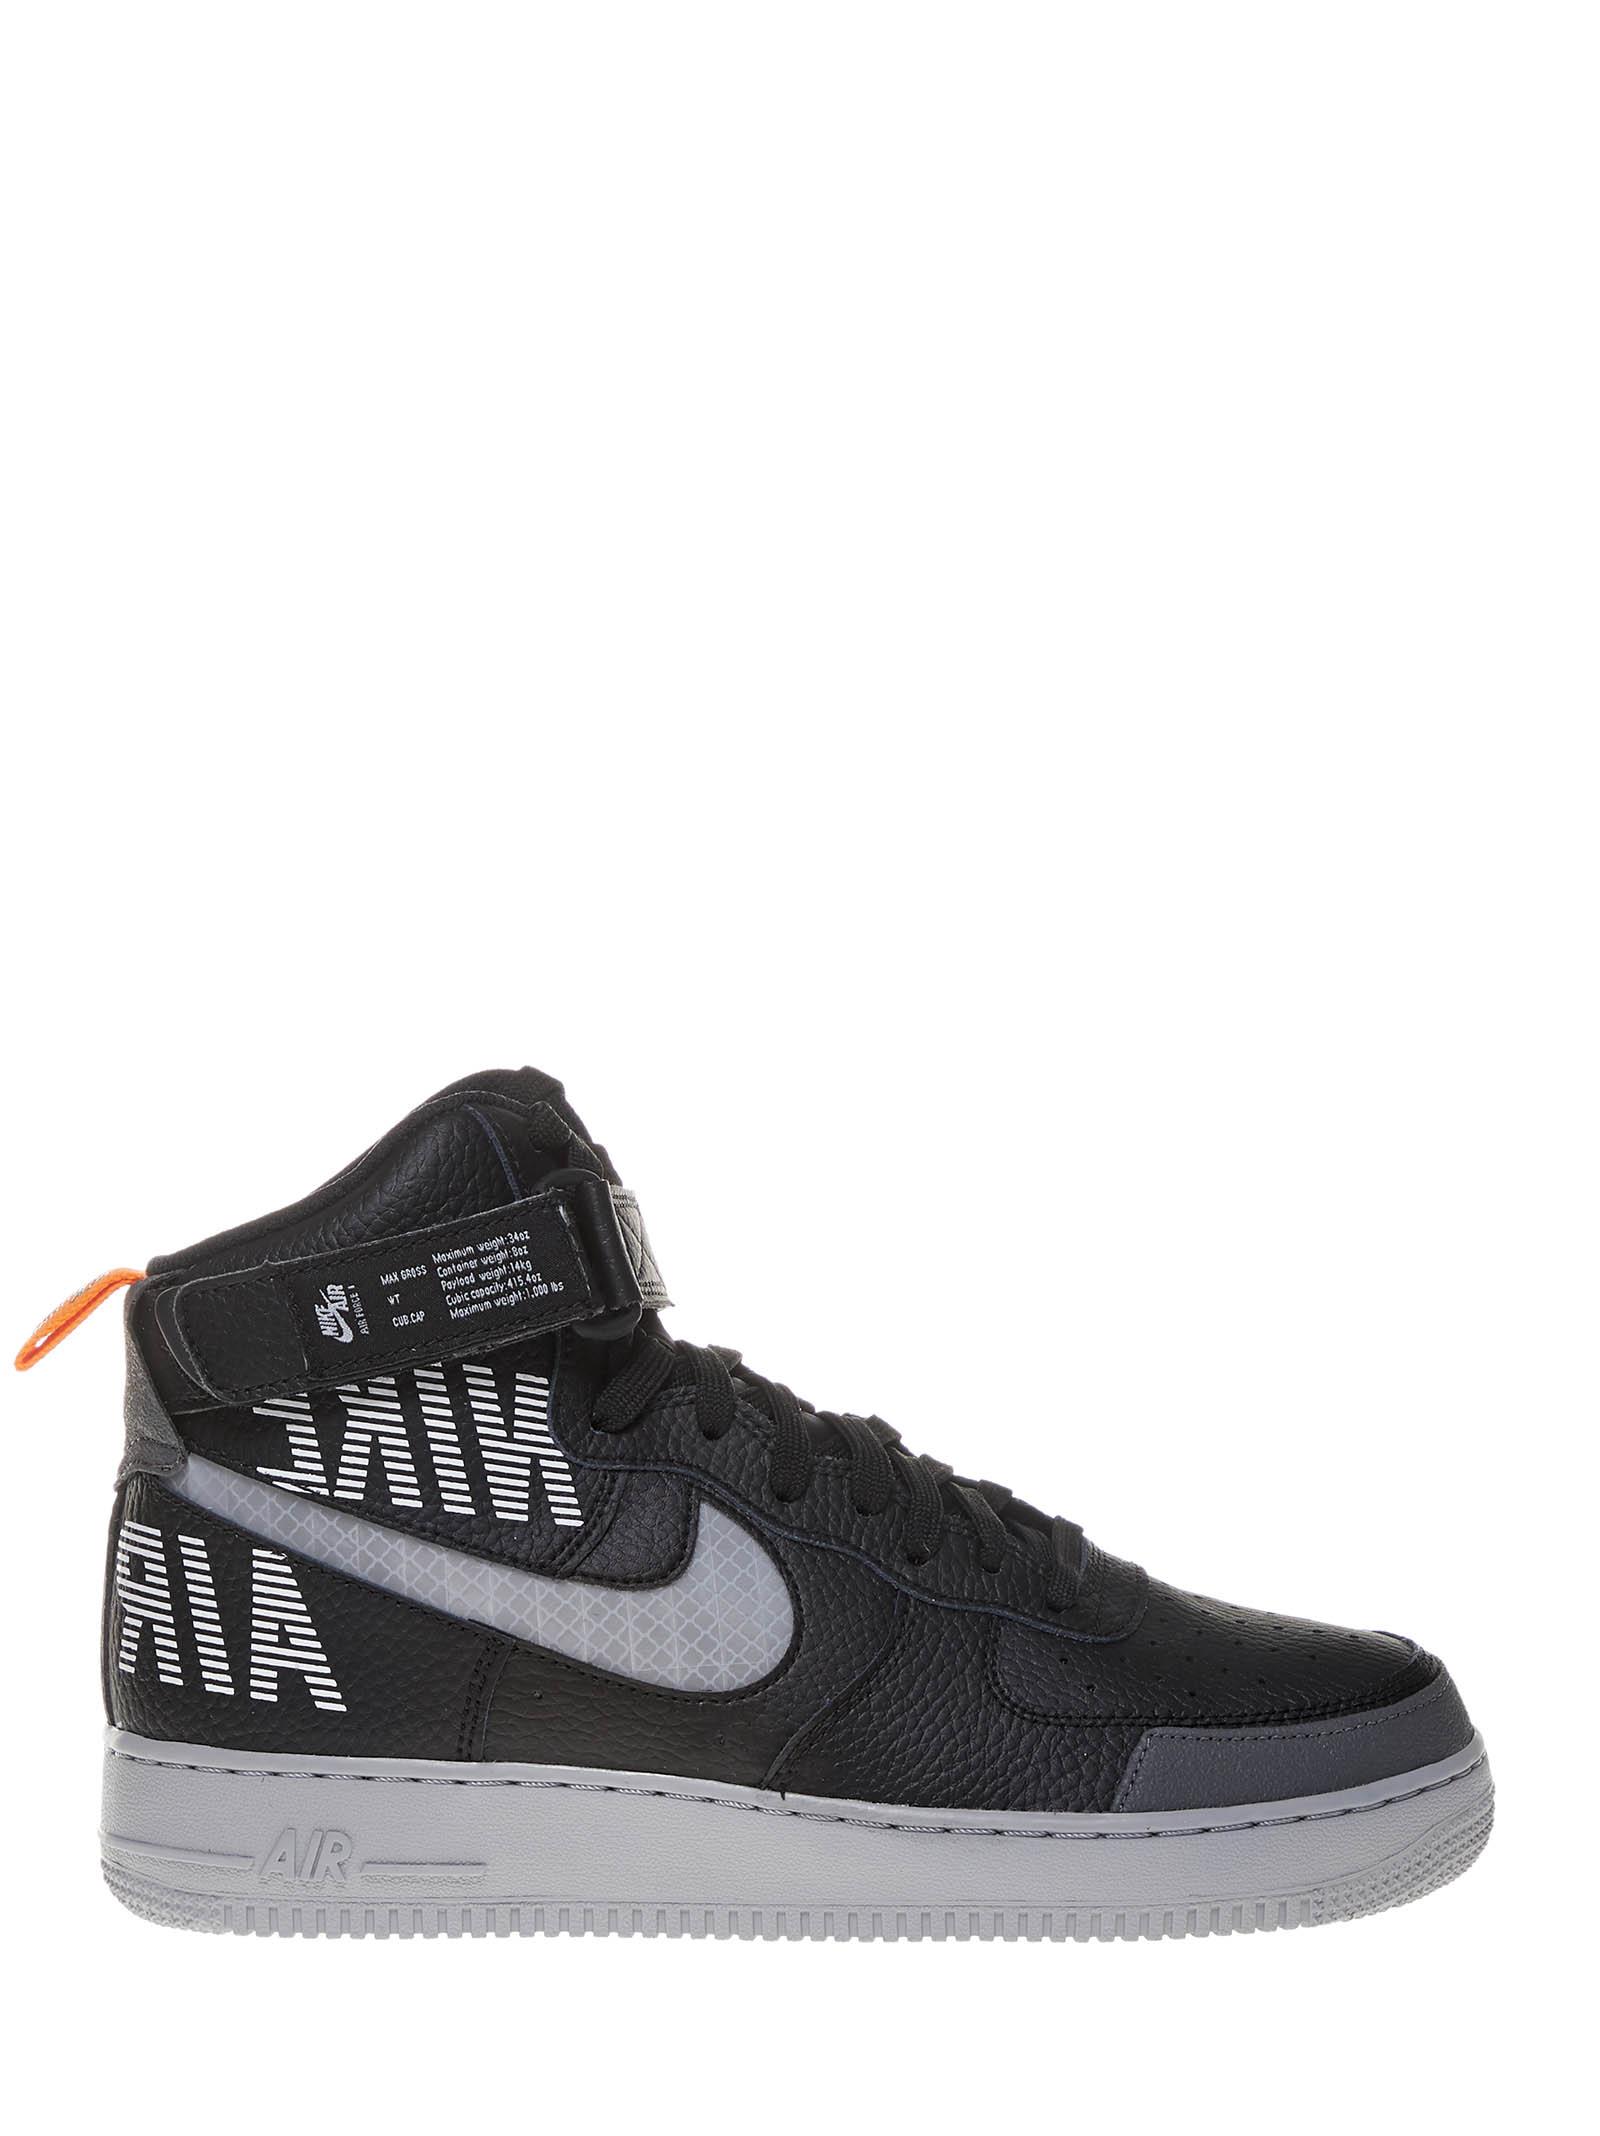 Nike Black Air Force 1 Hight '07 Lv8 Sneakers With Reflective Swoosh And  Grey Details. for Men